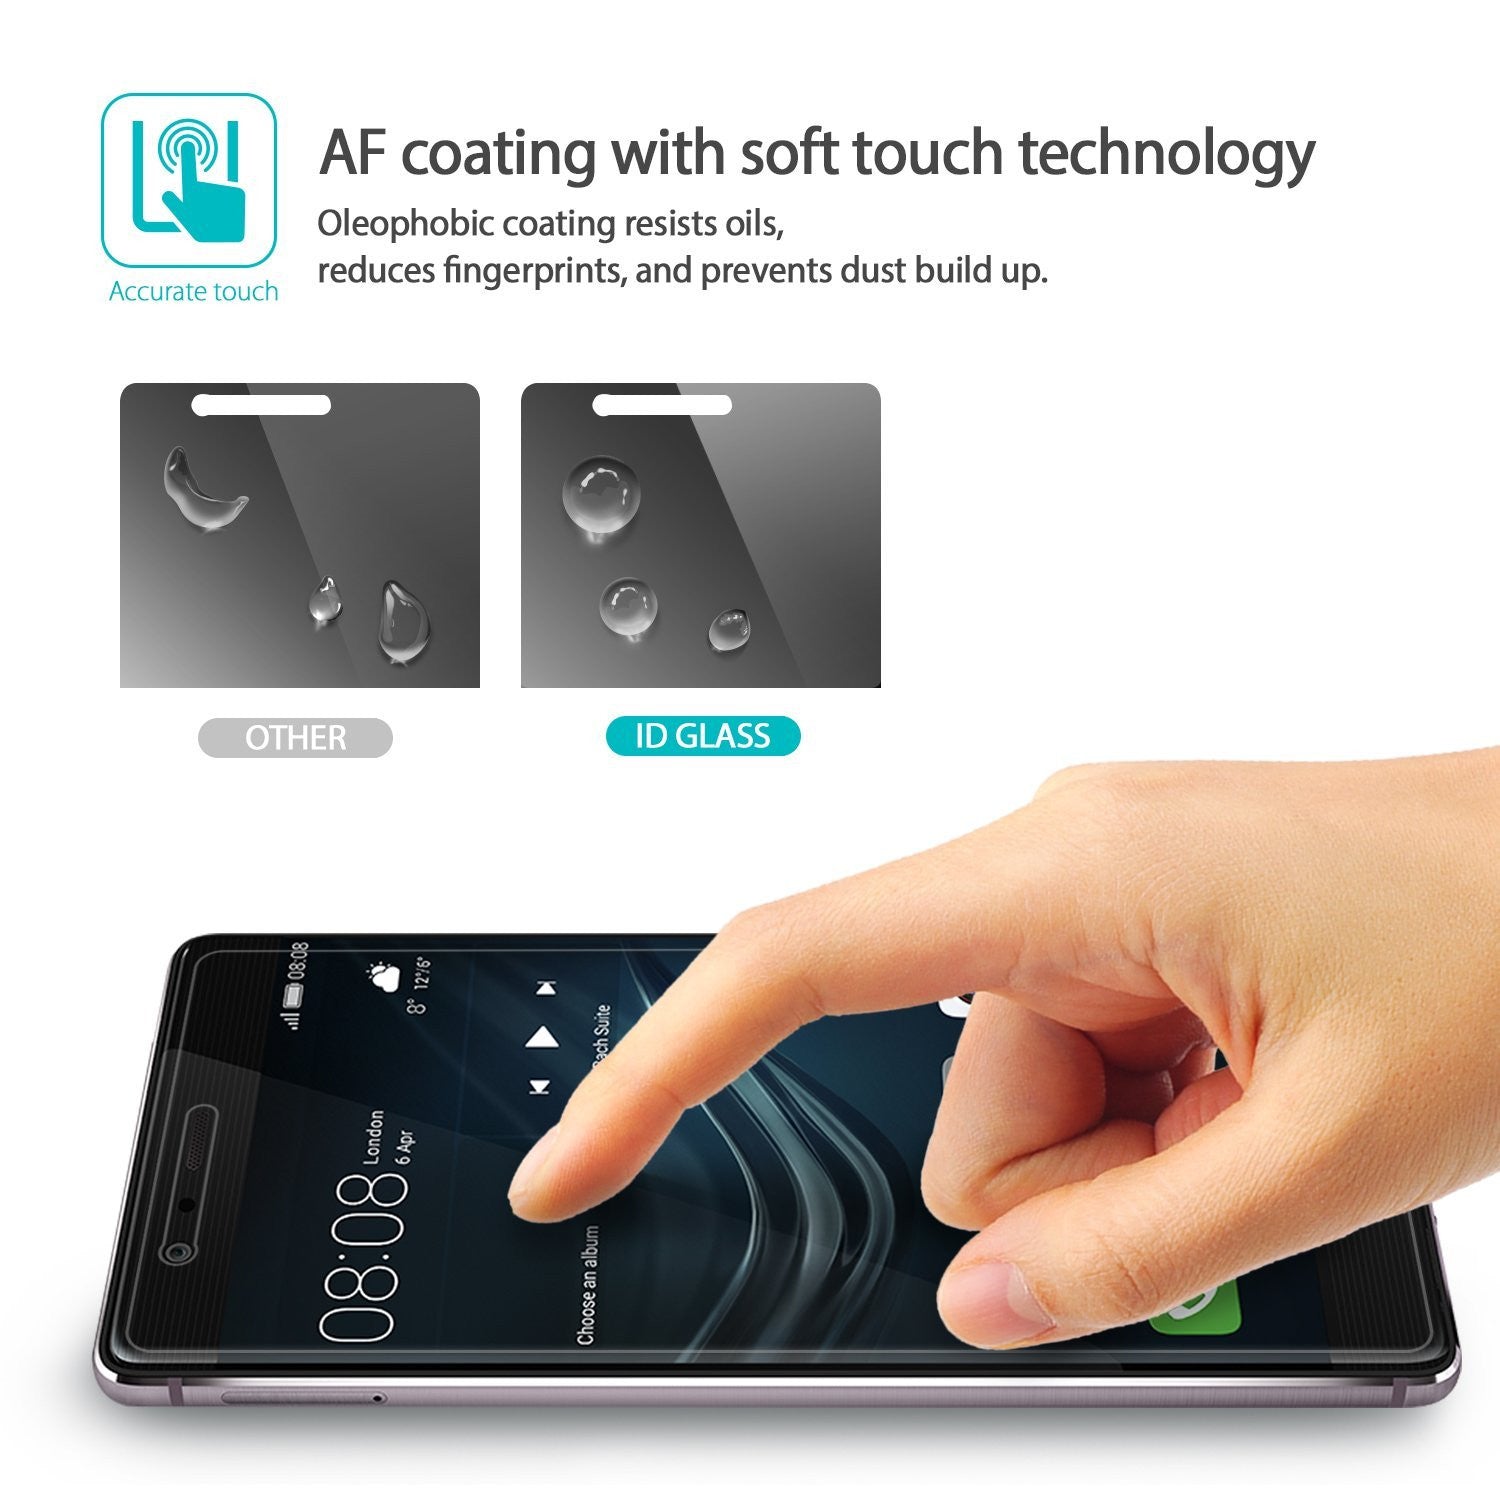 af coating with soft touch technology